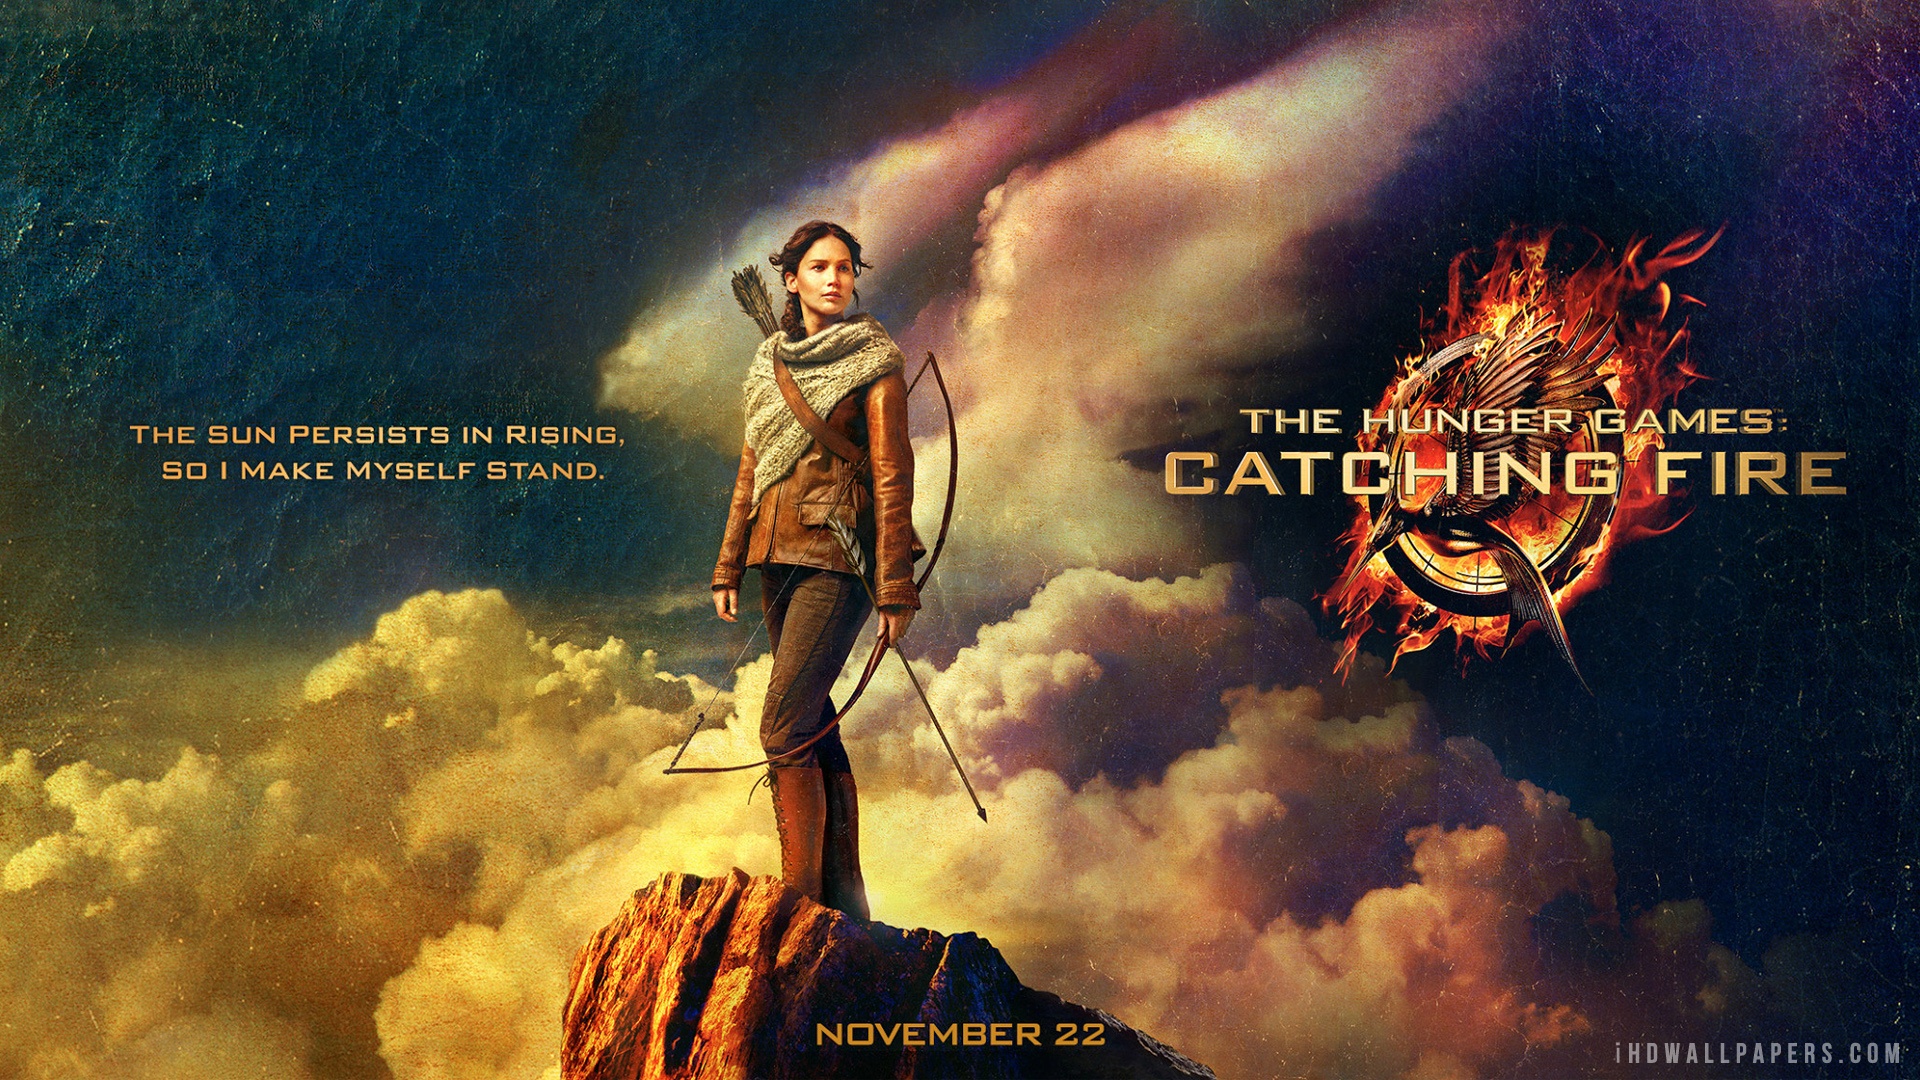 Download The Hunger Games Catching Fire 2013 wallpaper from the 1920x1080